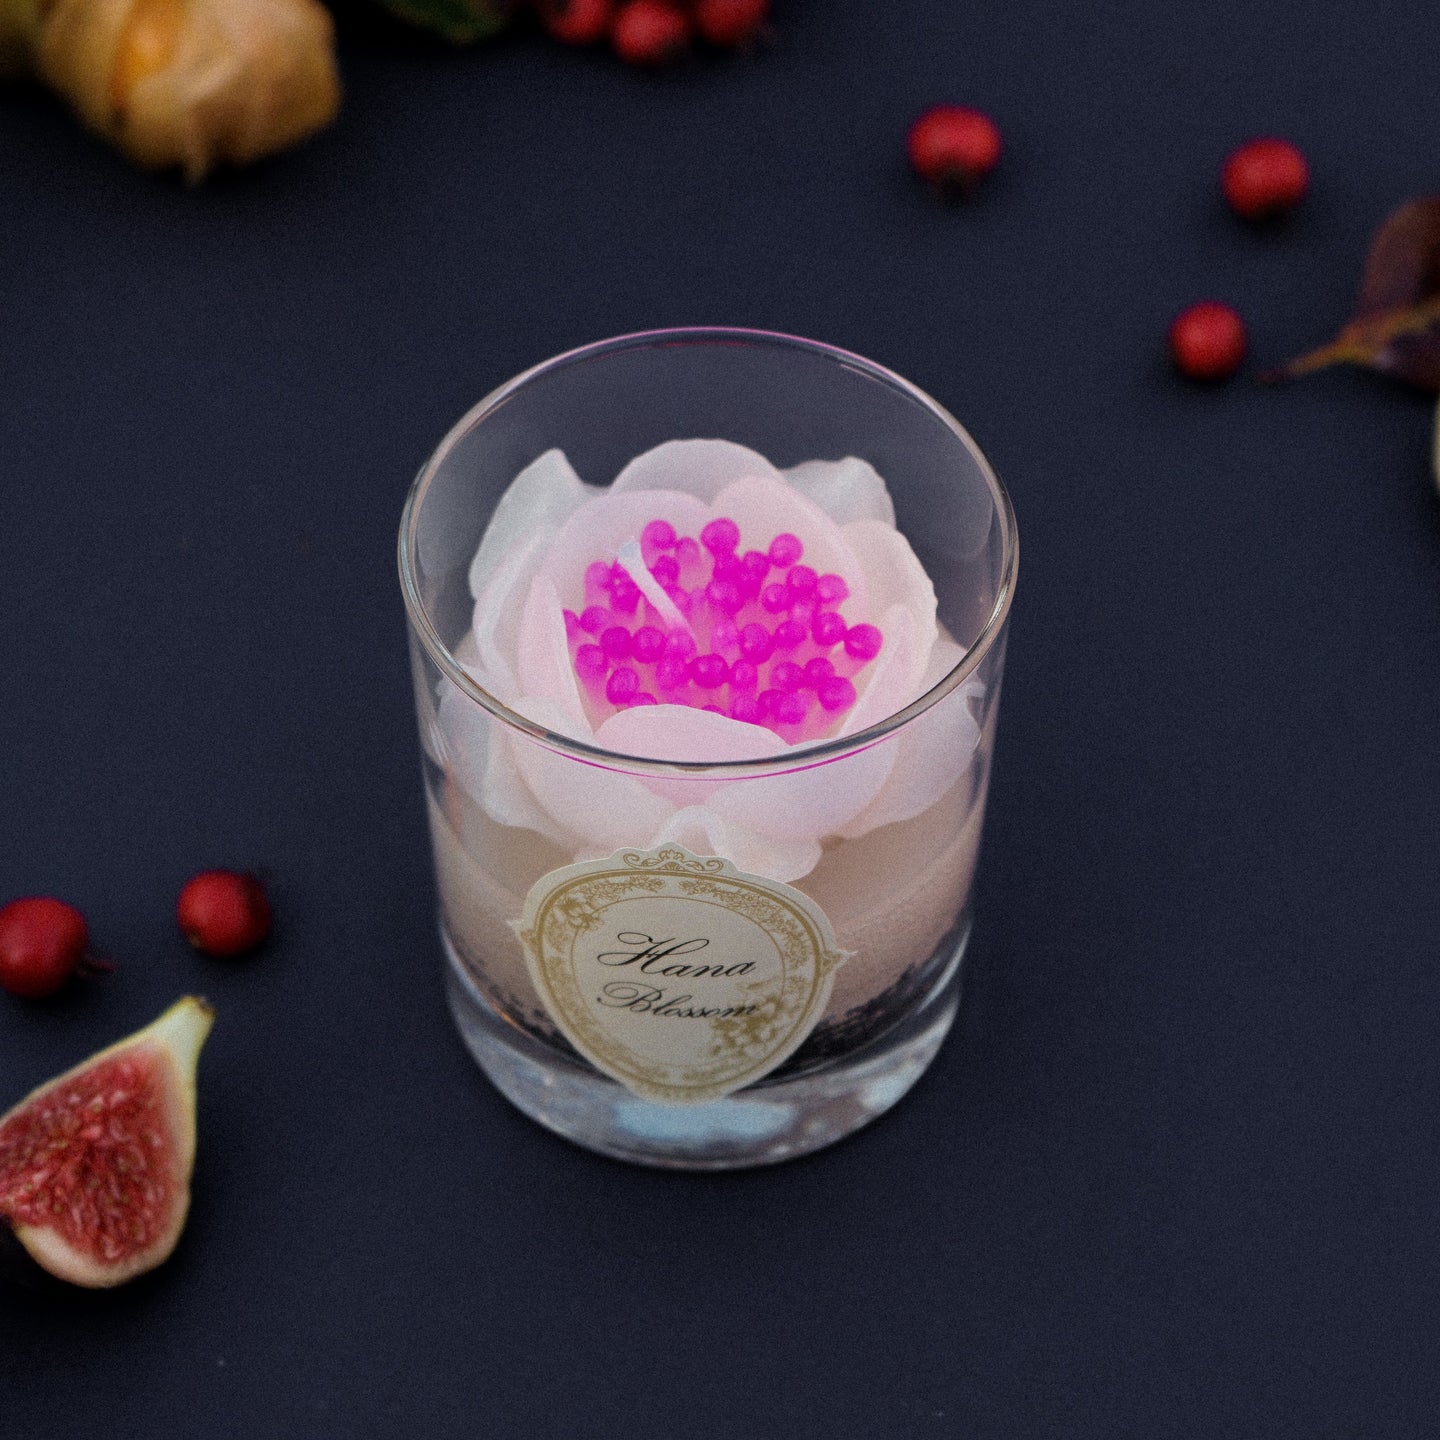 Buy Peony Scented Container Candle by Orchid Daisy